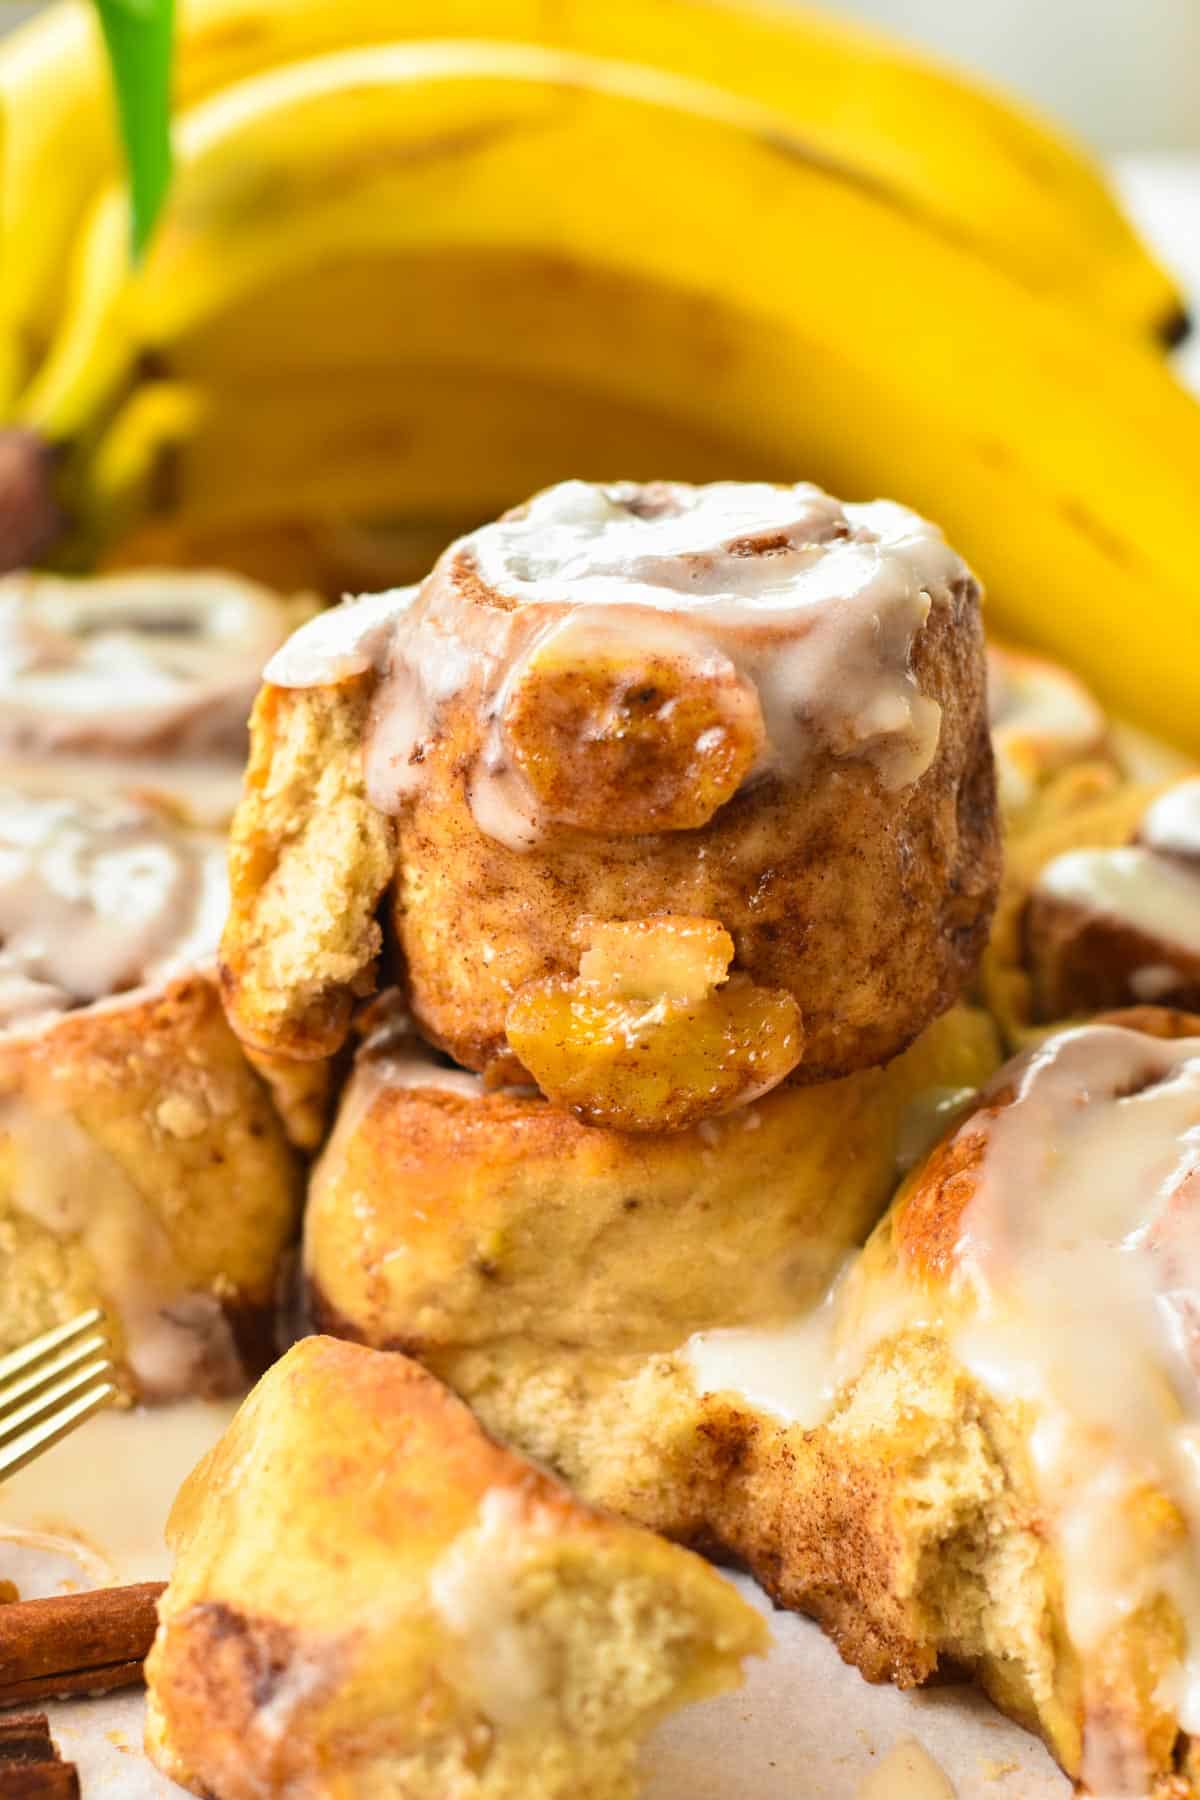 A banana bread cinnamon roll on top of a batch of banana cinnamon rolls, half open and showing the banana inside the rolls.